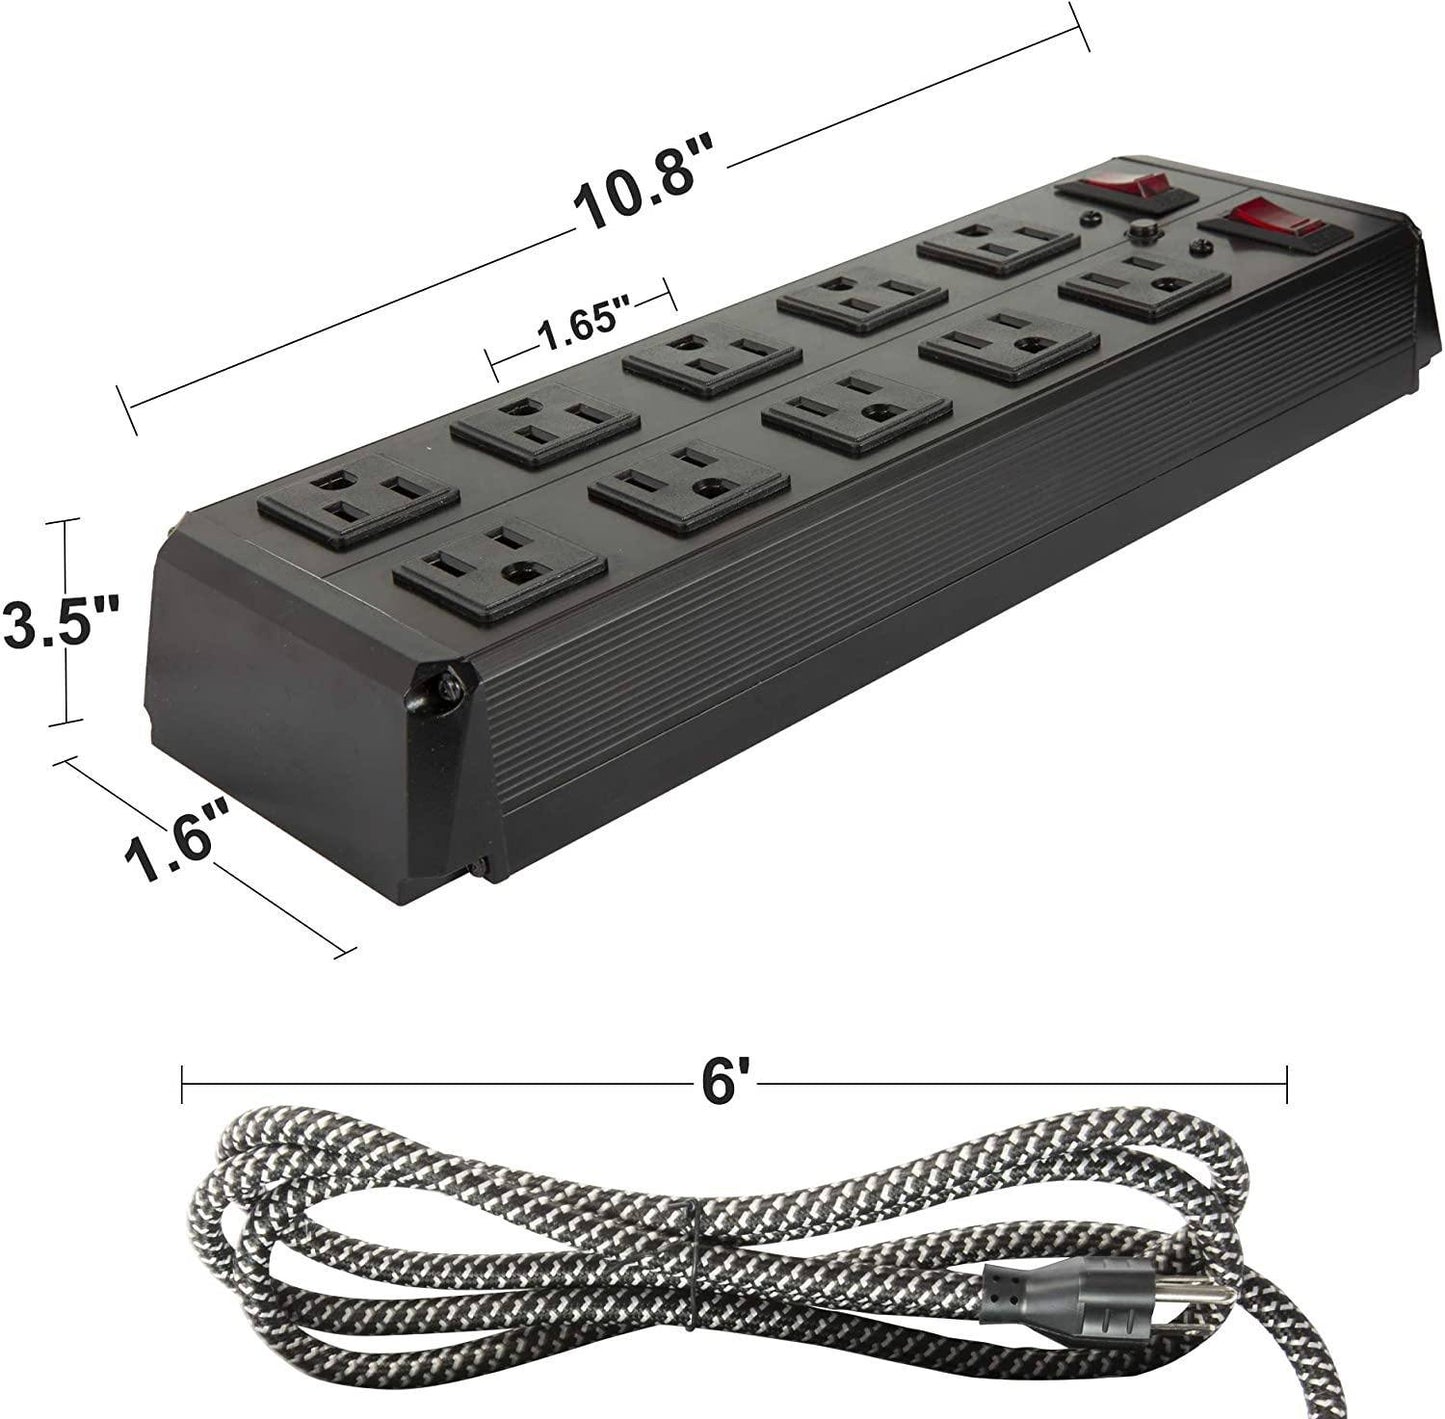 Bosonshop Surge Protector Power Strip with Outlets  Ports 6-Foot Cord for Home, Office -Black